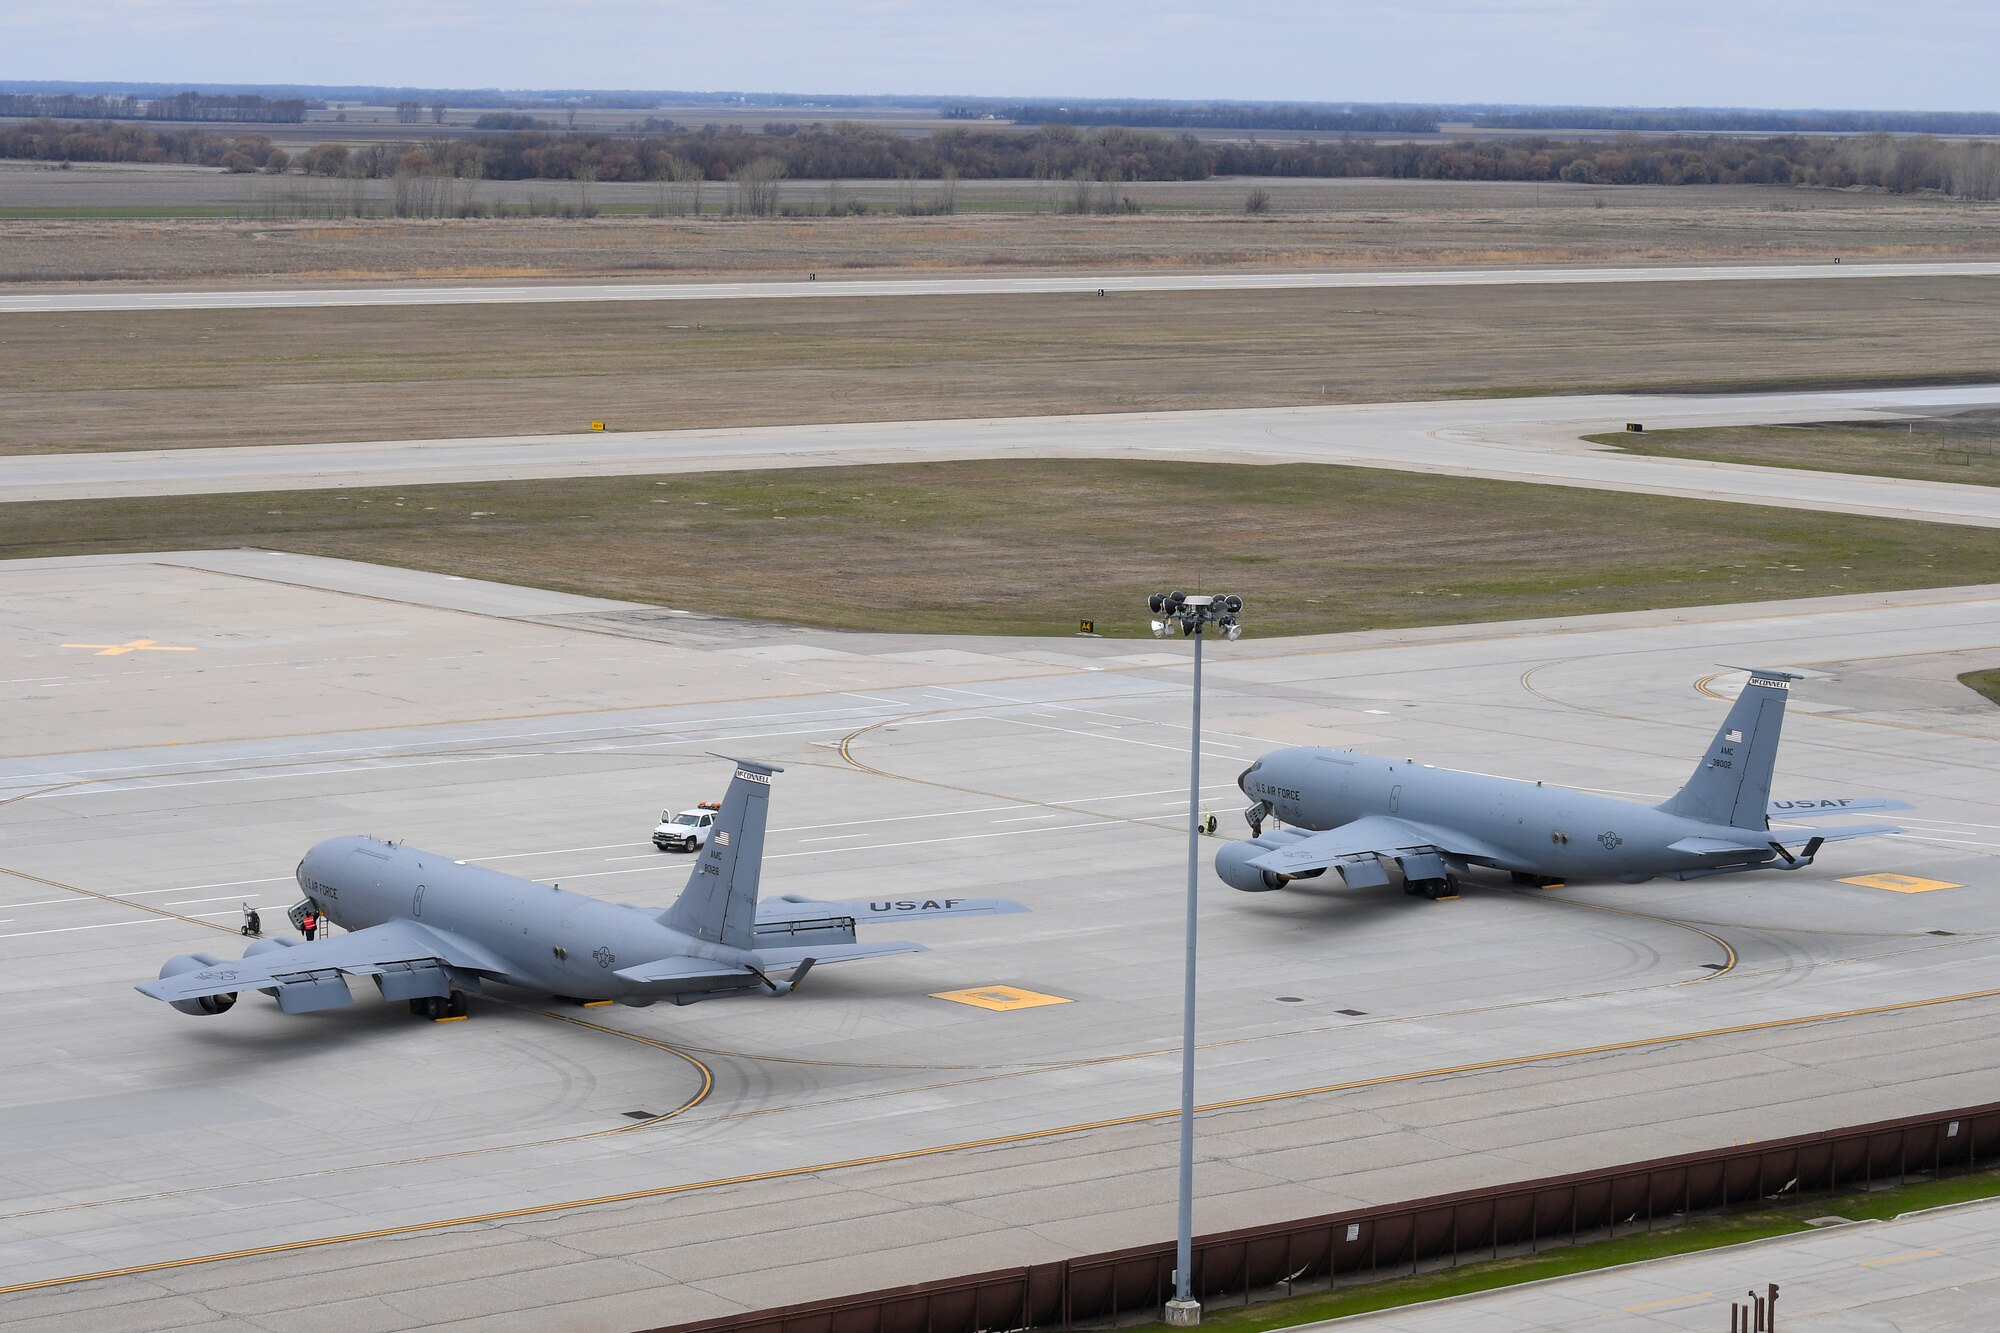 Two KC-135 Stratotankers, assigned to the 22nd Refueling Wing, receive routine maintenance after arriving May 6, 2019, to Grand Forks Air Force Base, North Dakota. McConnel AFB, Kansas, operates and maintains 37 KC-135’s, several of which were temporarily housed at Grand Forks AFB during a bout of inclement weather throughout Kansas. (U.S. Air Force photo by Senior Airman Elora J. Martinez)